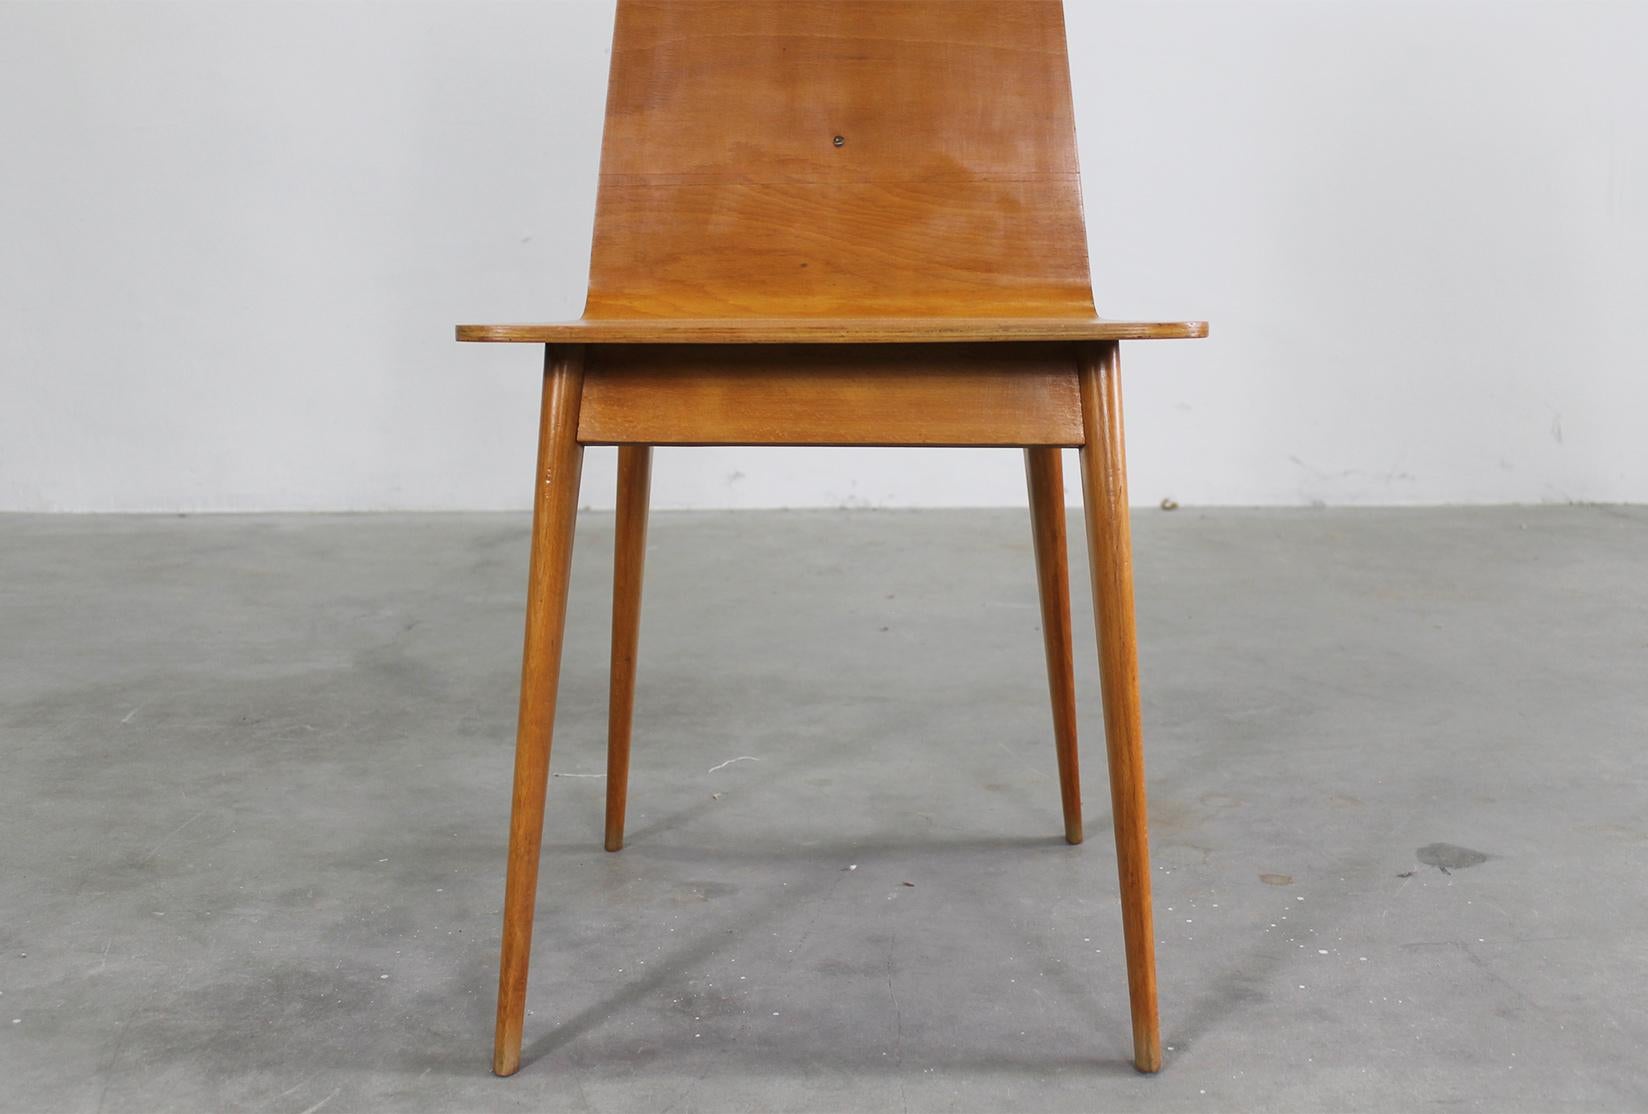 Set of Six Dining Chairs in Wood by Sineo Gemignani Italian Manufacture 1940s For Sale 9